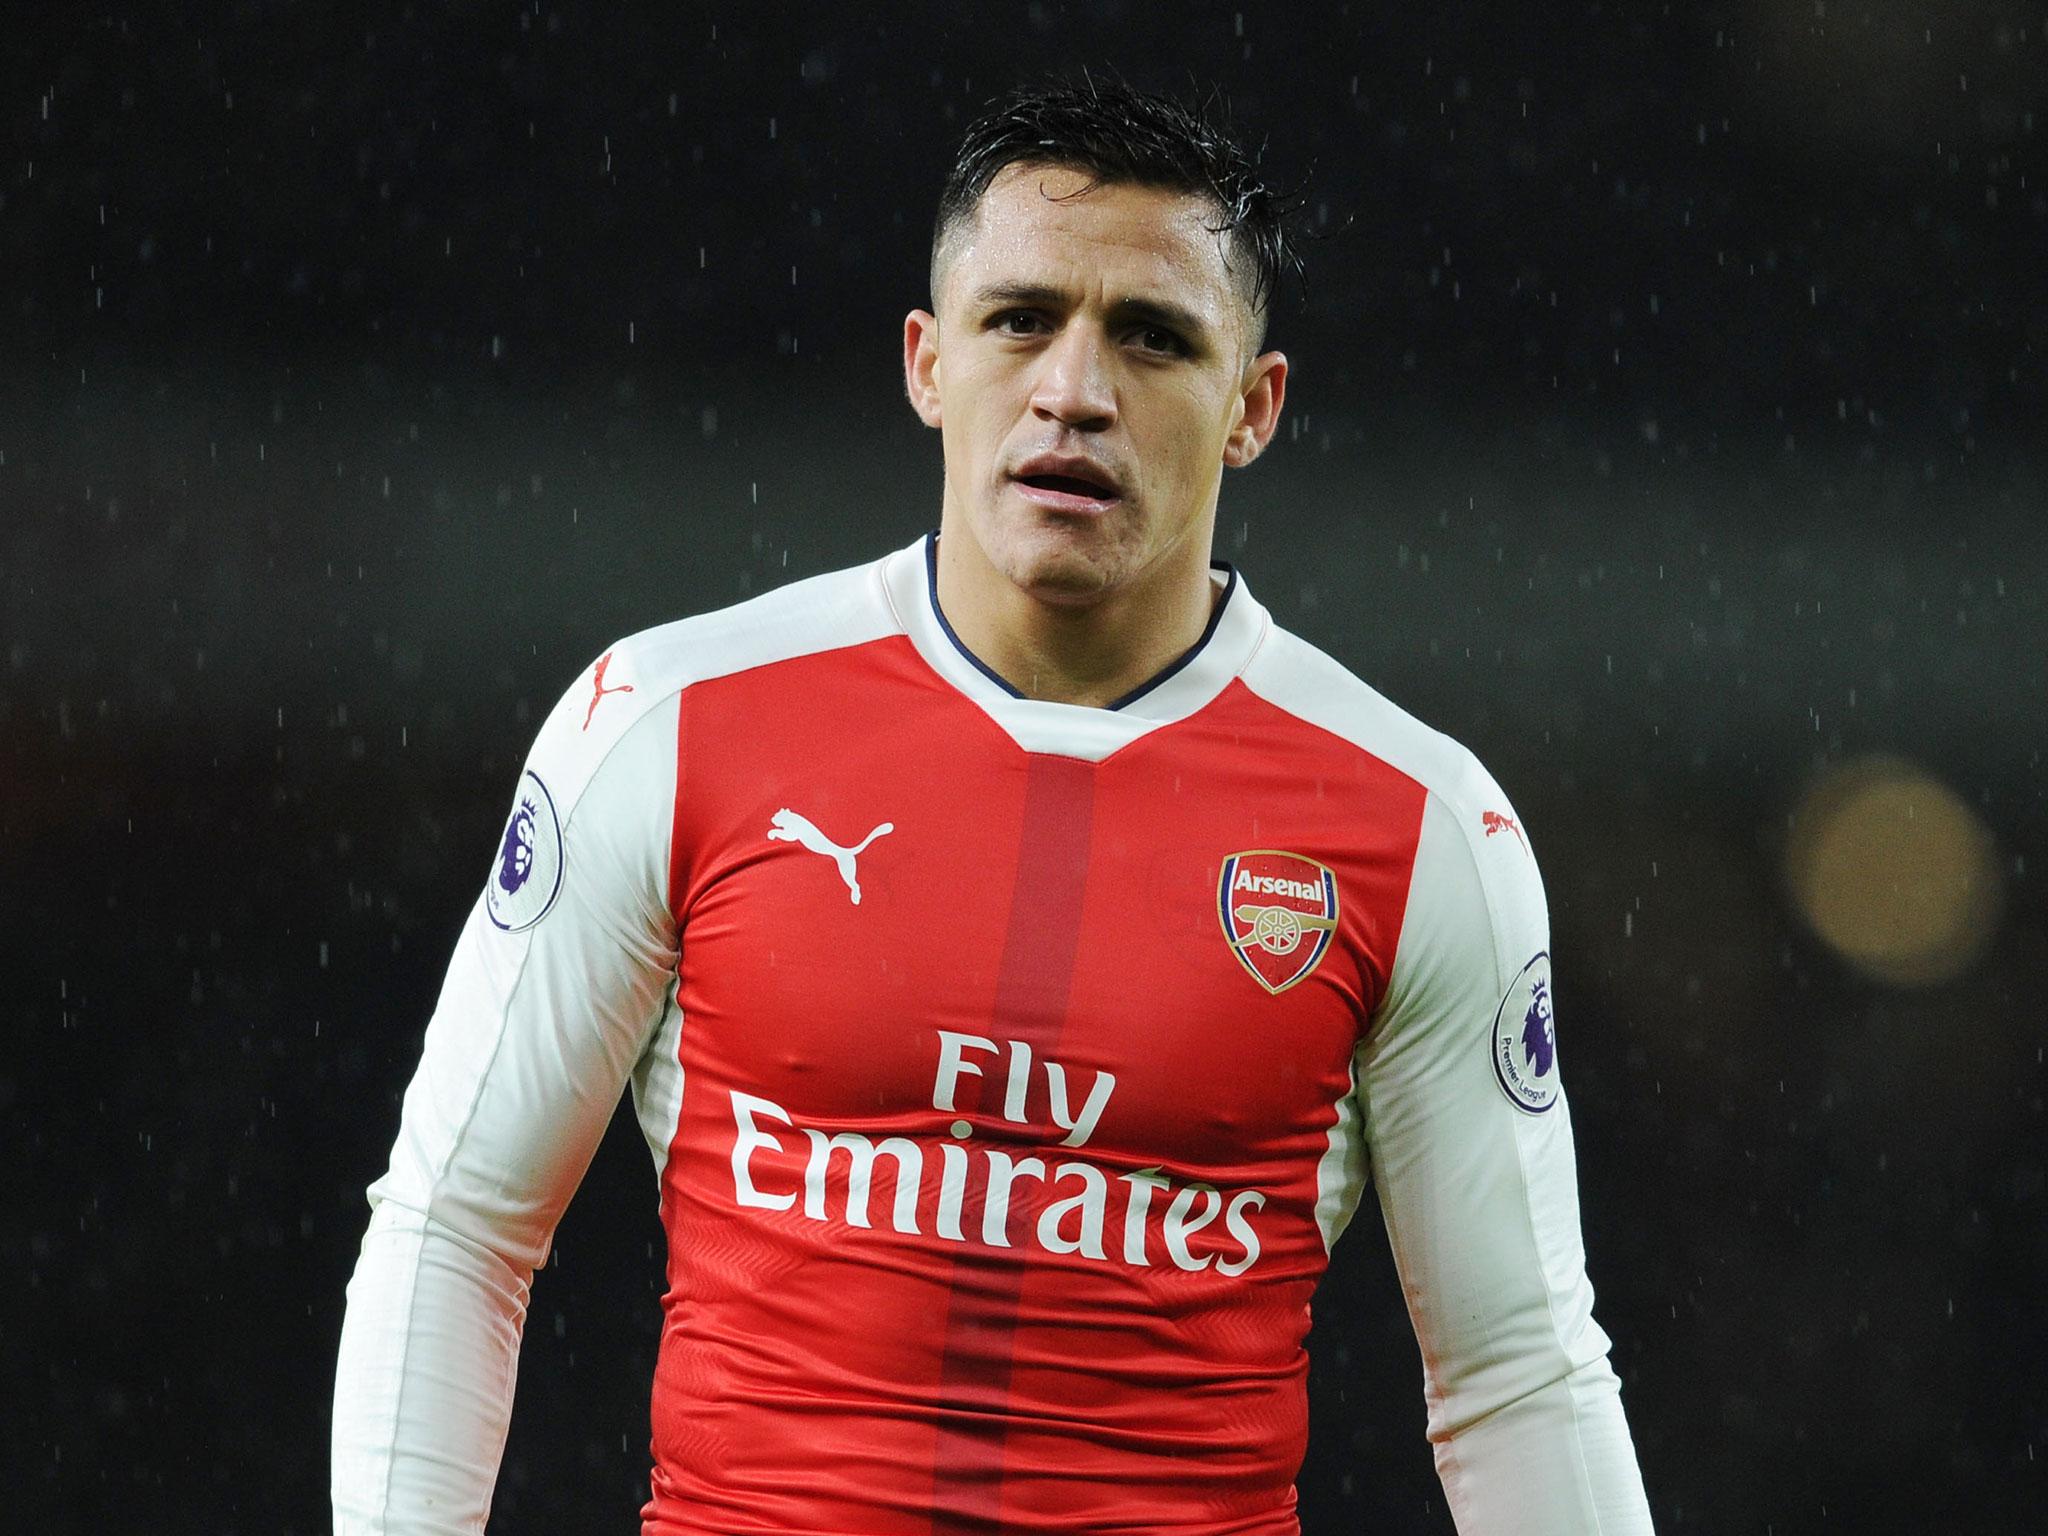 Alexis Sanchez says he is 'very happy' at Arsenal and wants to 'give the fans a new title' to celebrate